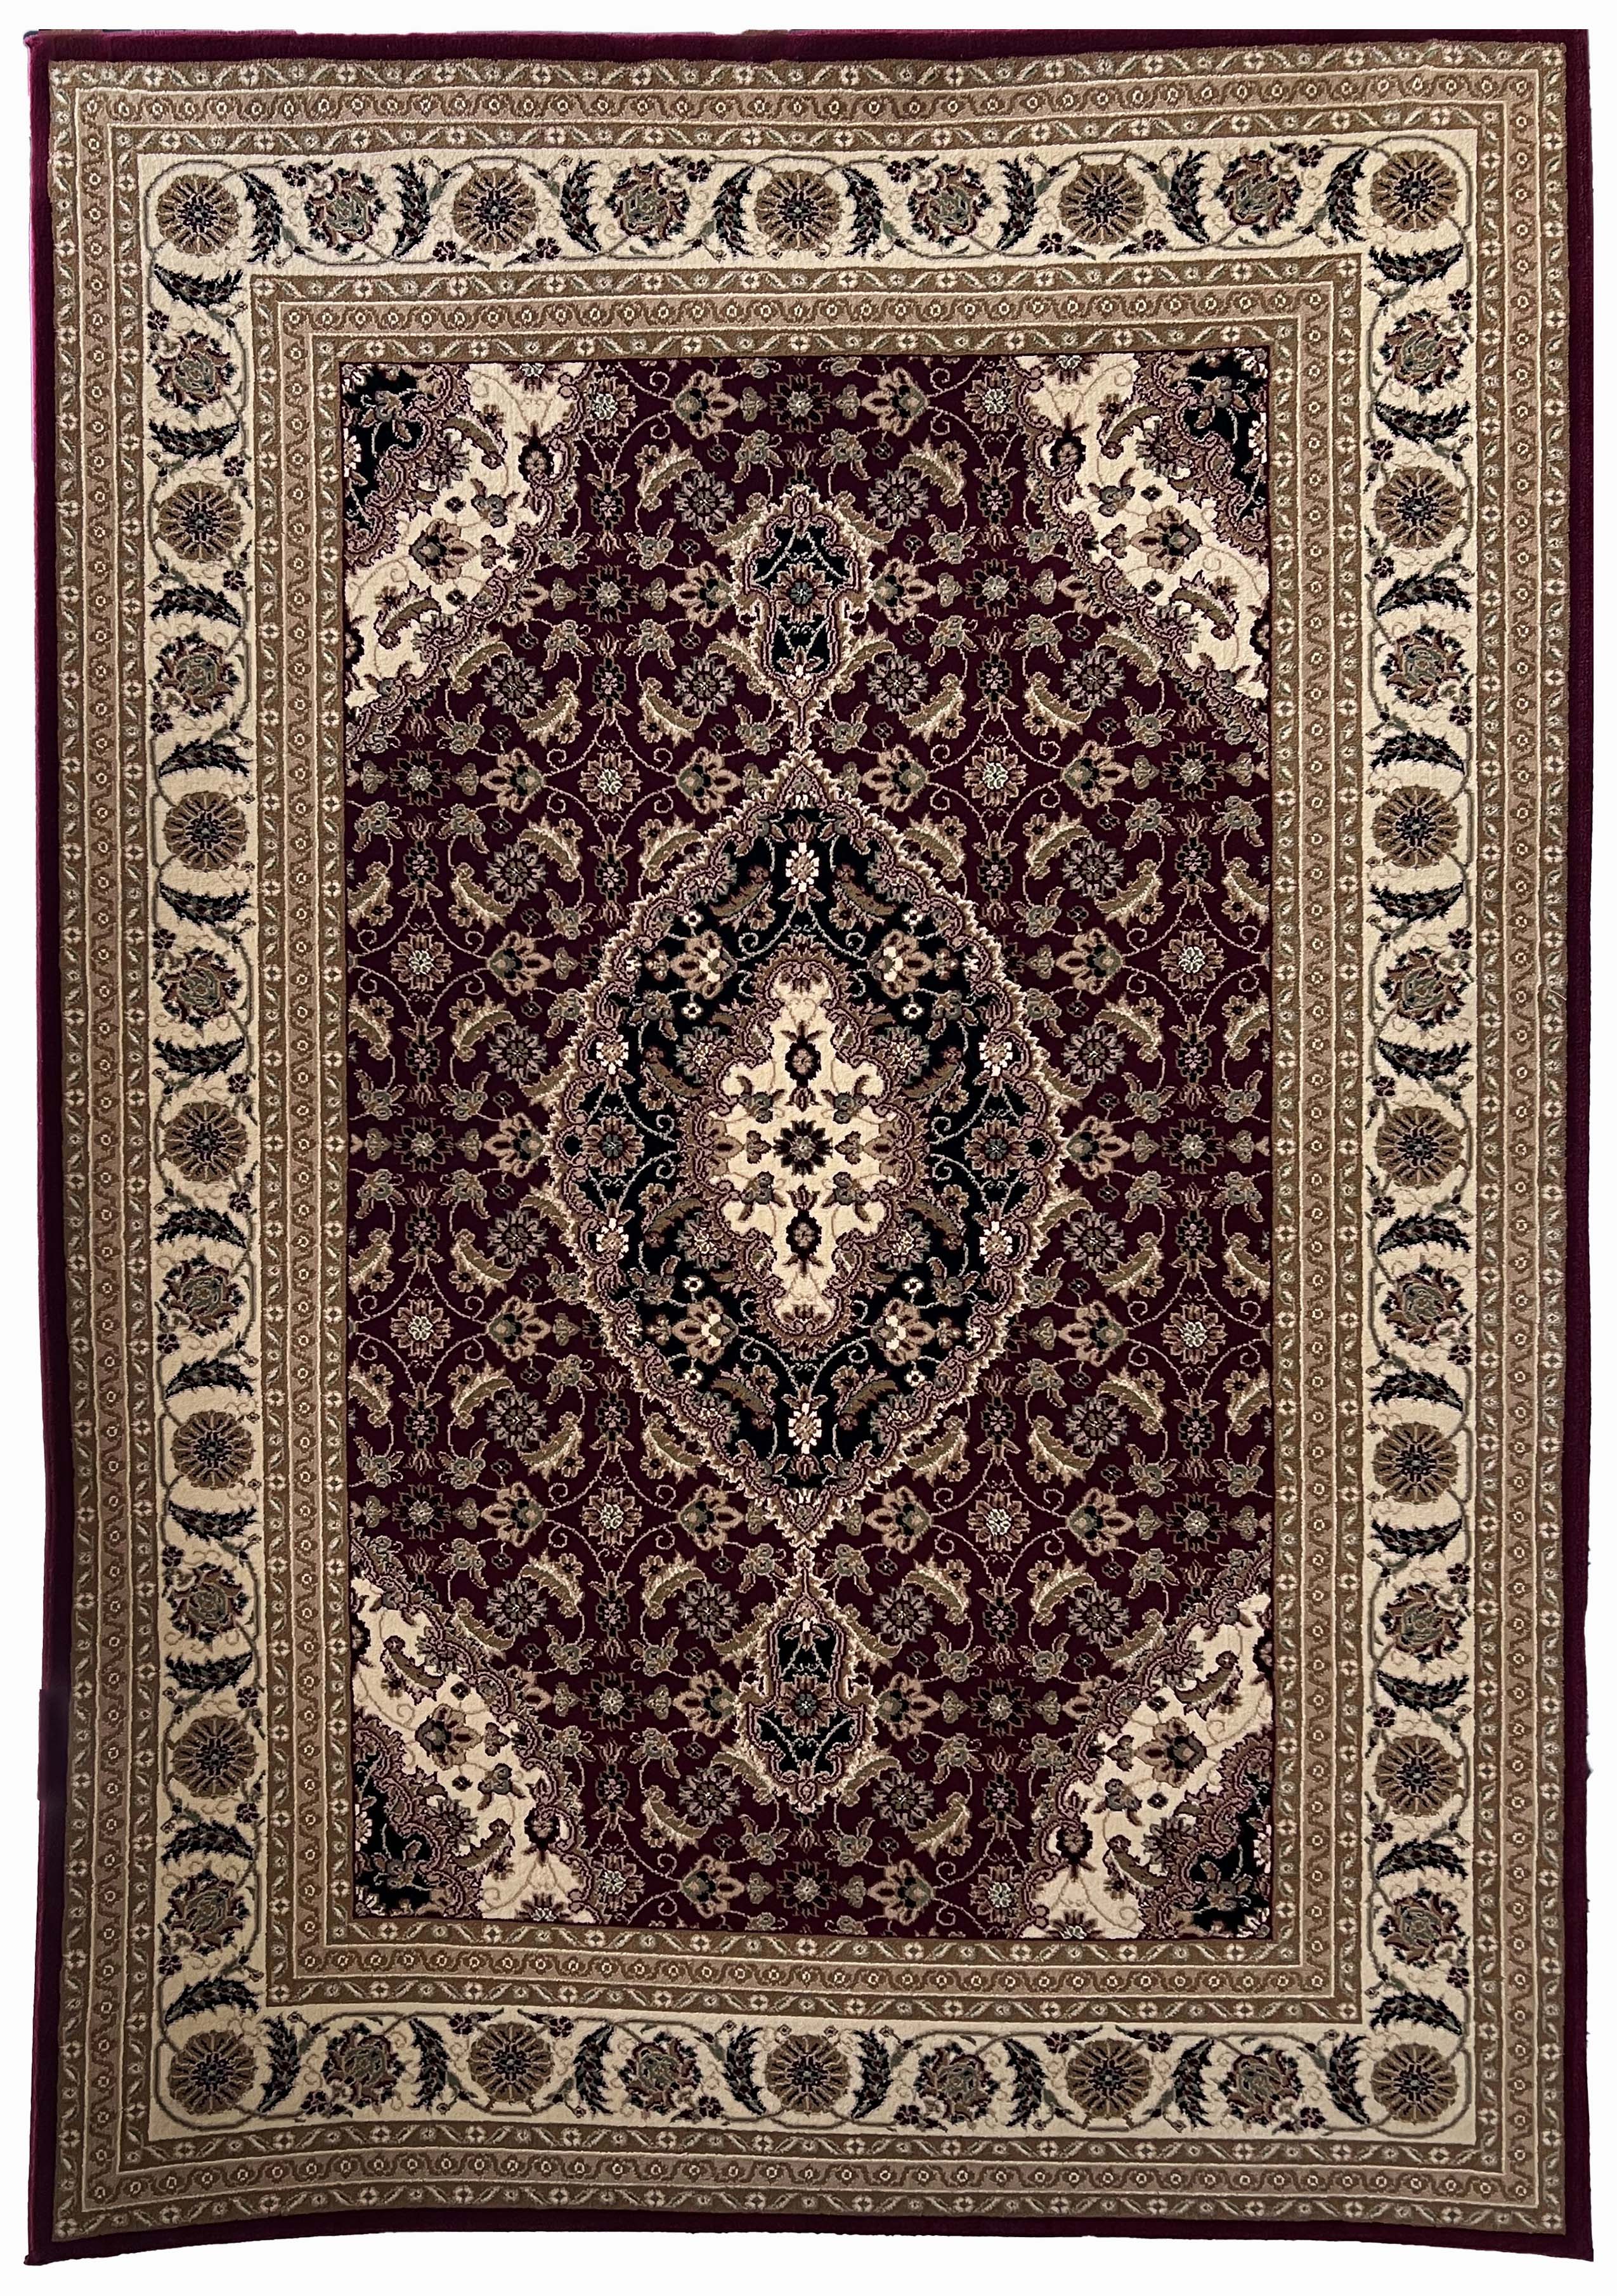 Cream/Ivory/Beige Traditional 5'4 x 5'4 Ft Tabriz Persian Area Rug